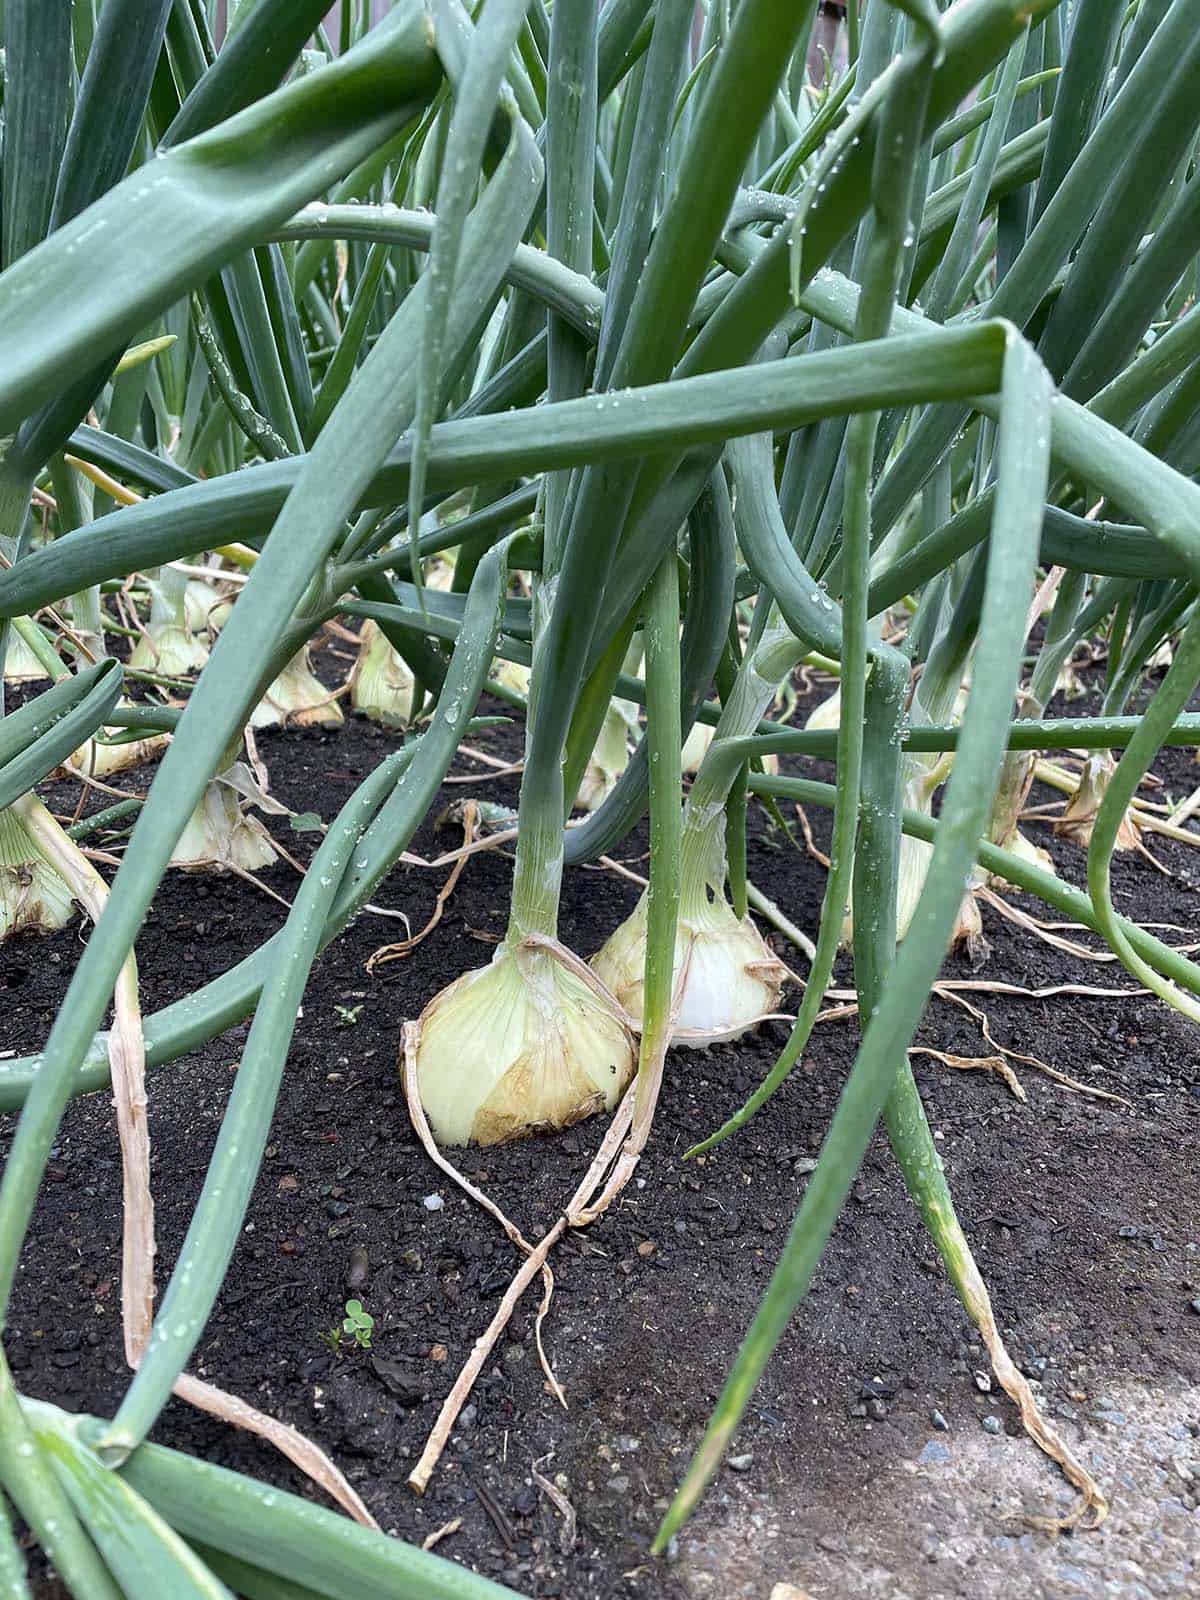 Two walla walla onions that have been planted too close together.